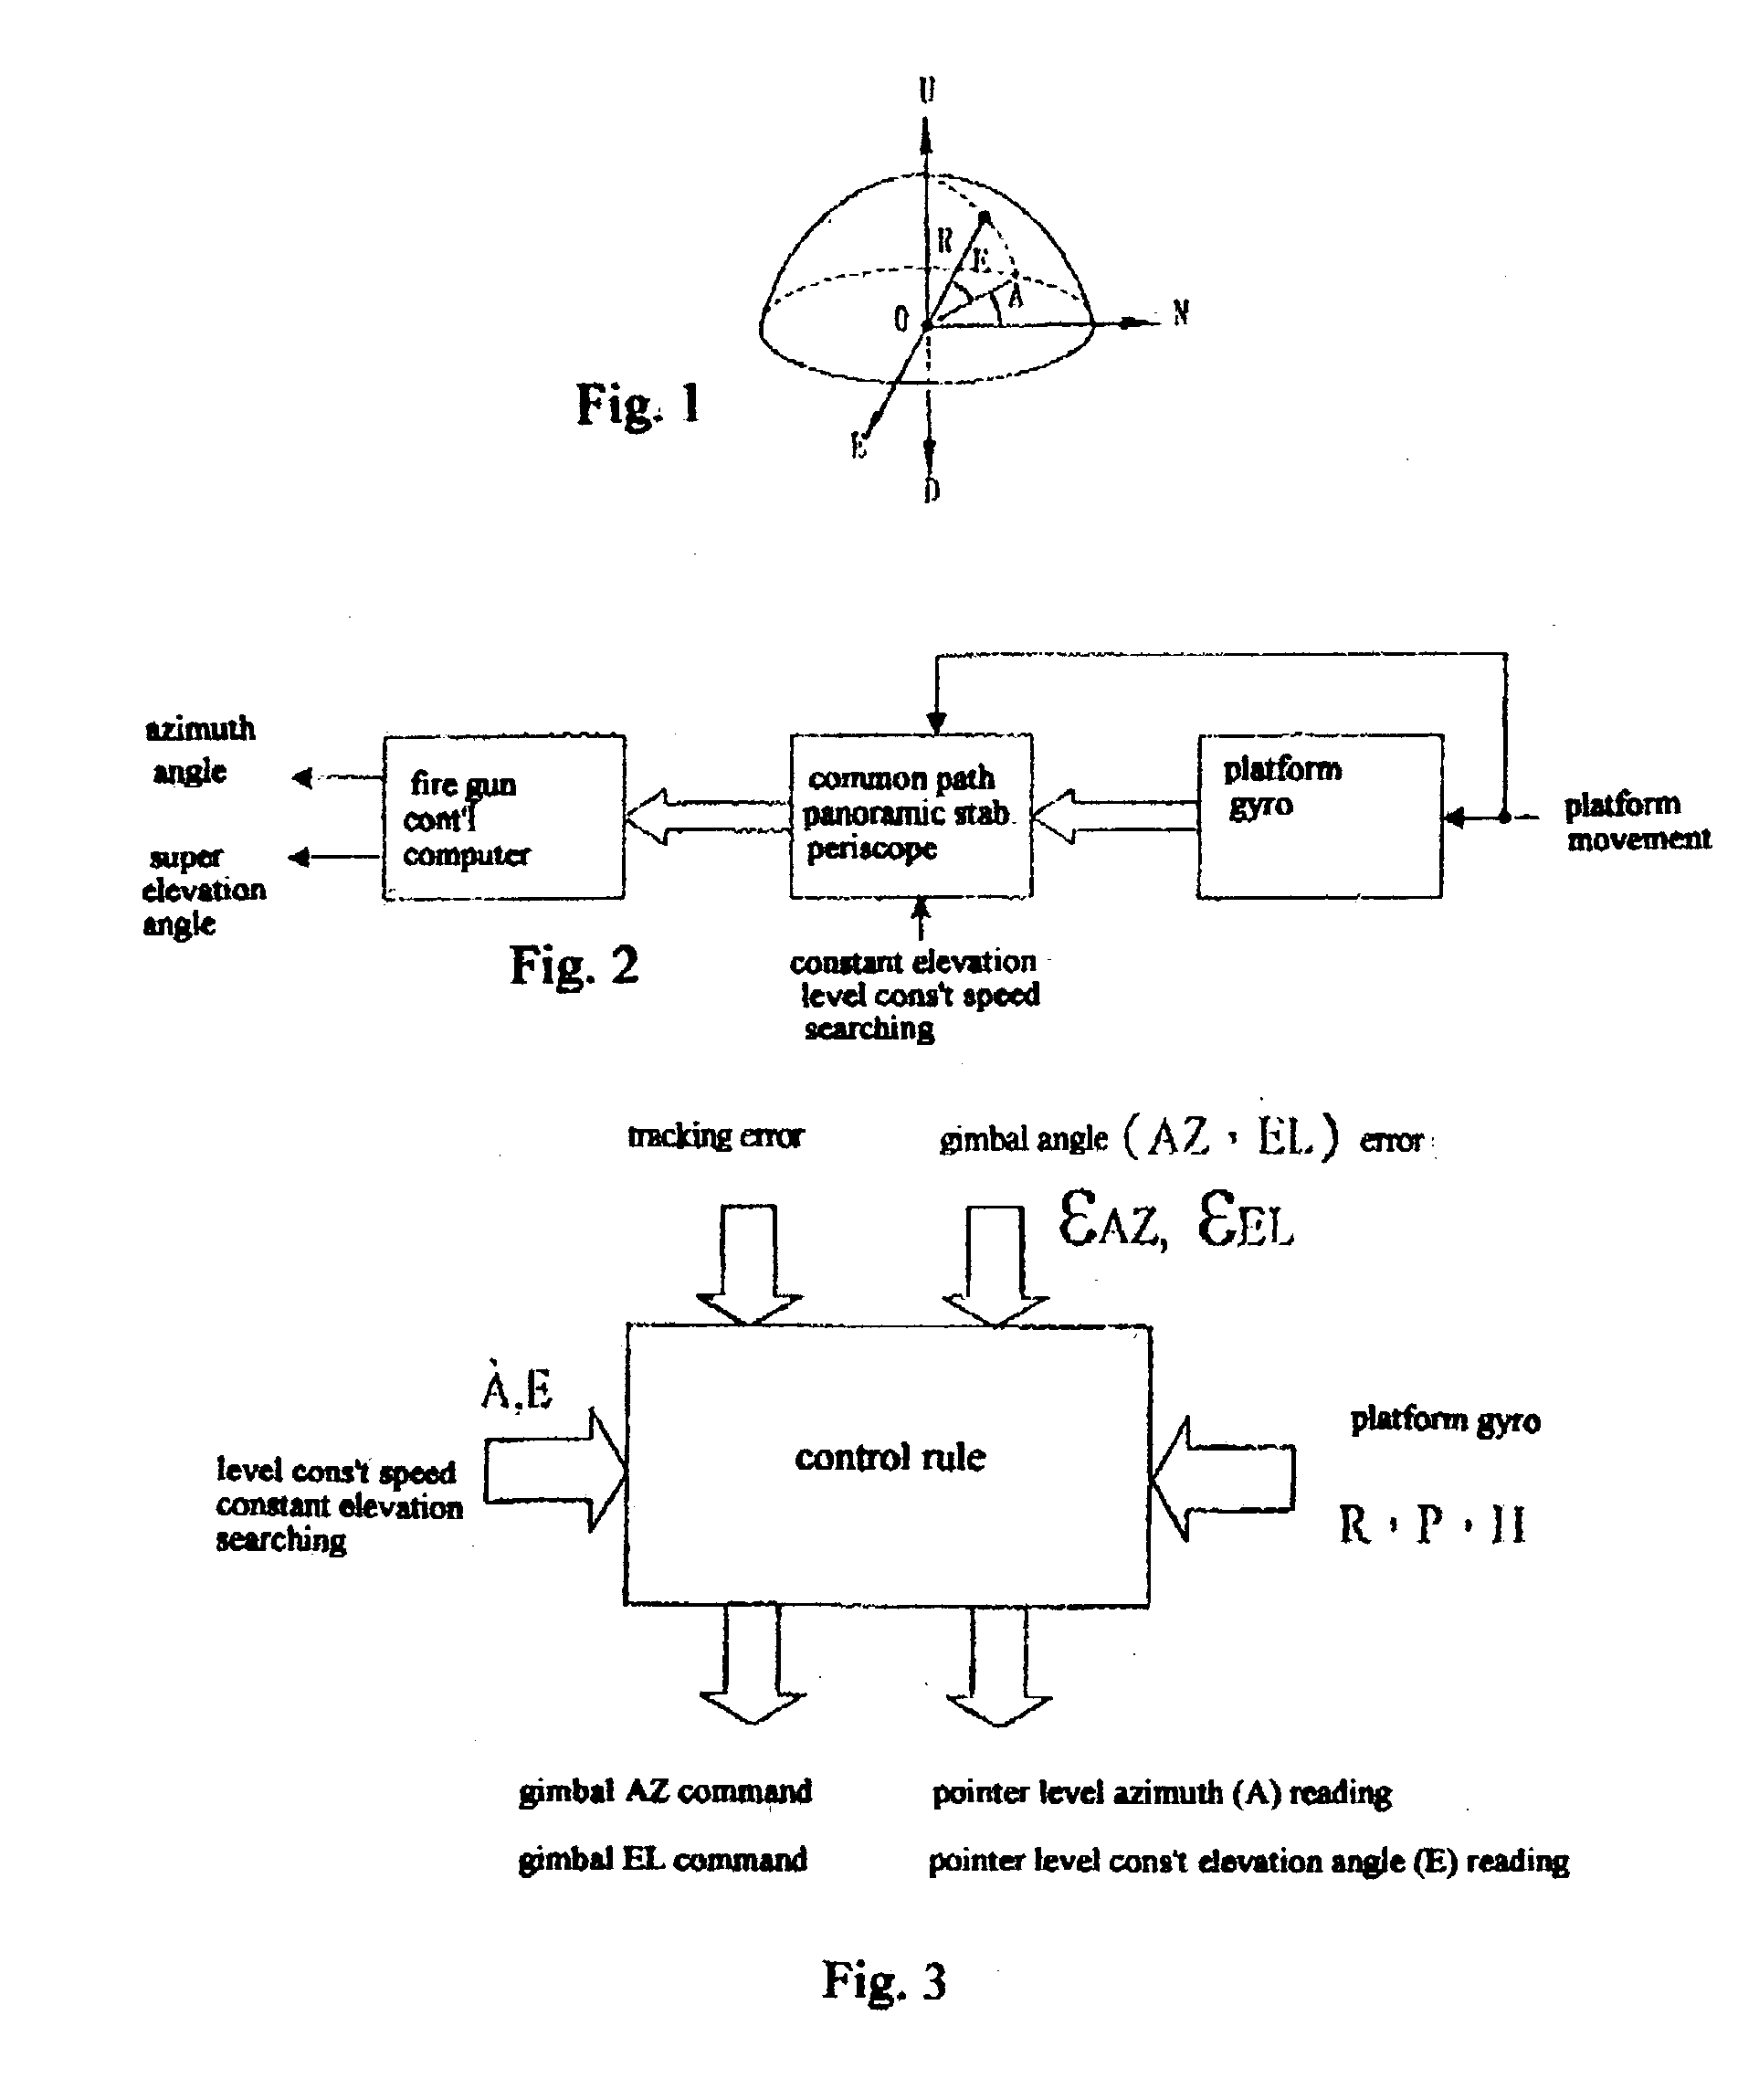 Control scheme for spatial and level searching of a panoramic stabilized periscope